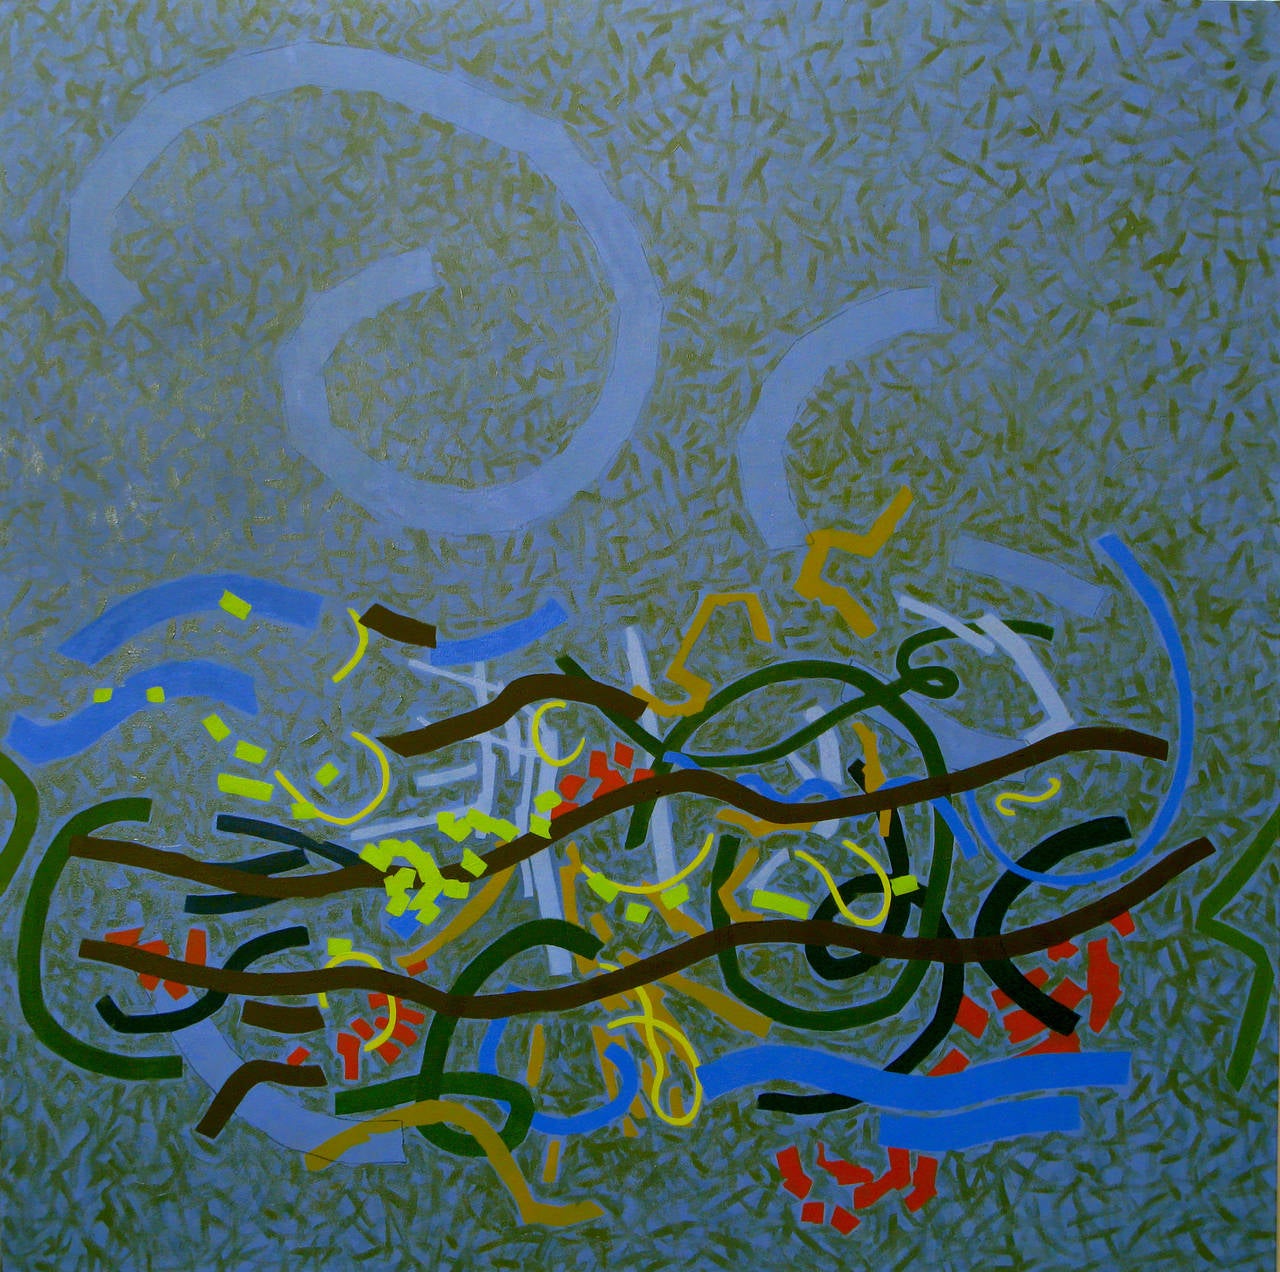 Movement and Migration - Painting by Janis Goodman